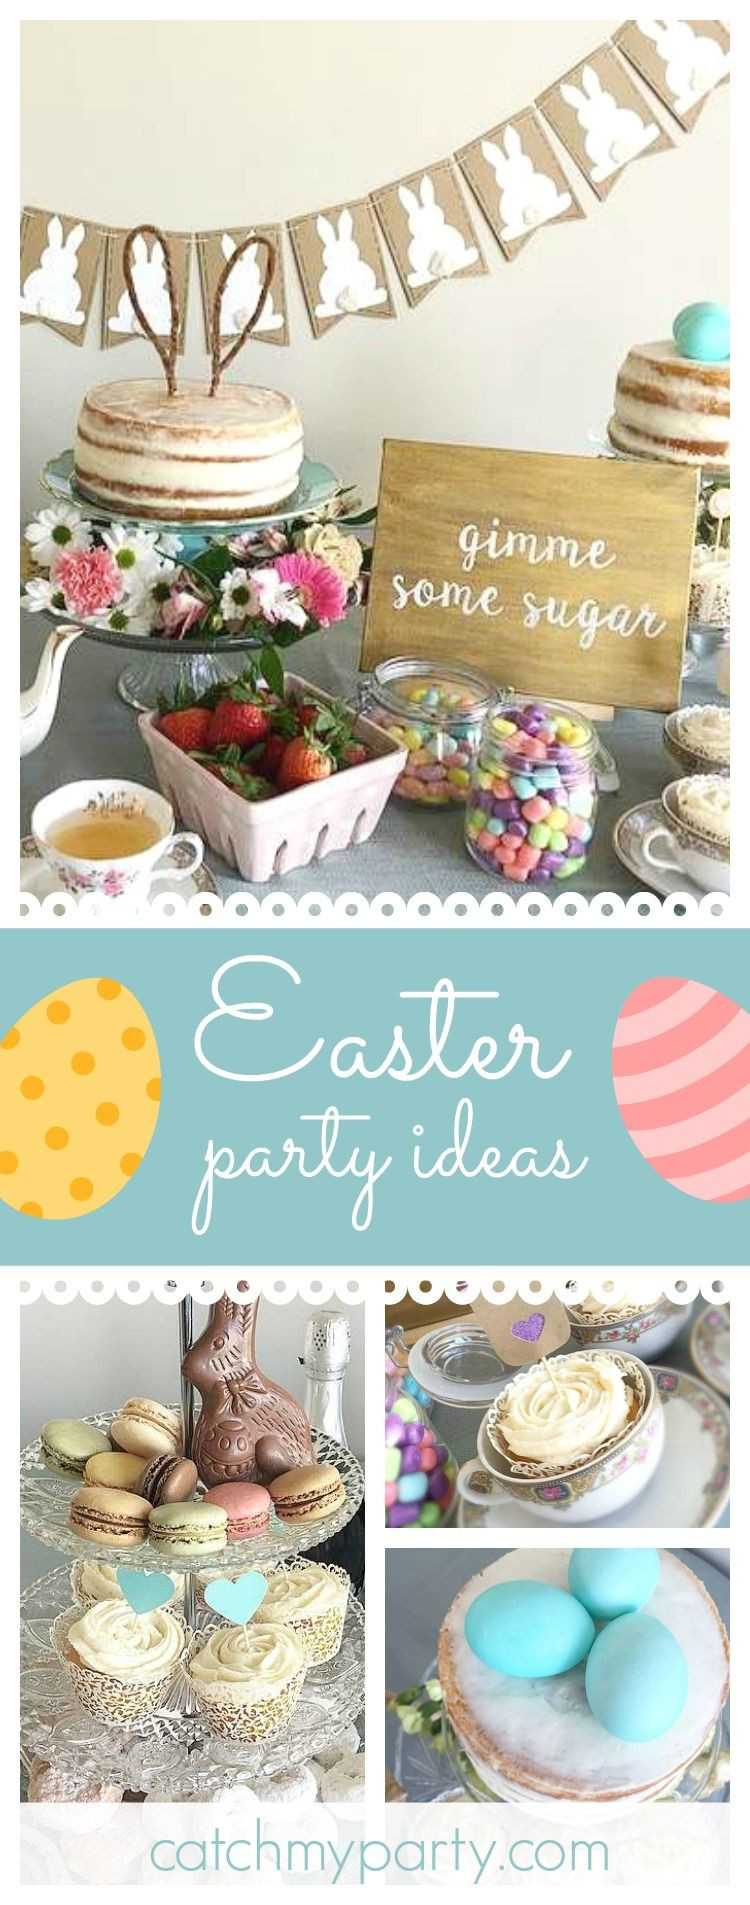 Easter Tea Party Ideas
 Easter Easter "Easter Tea Party" in 2019